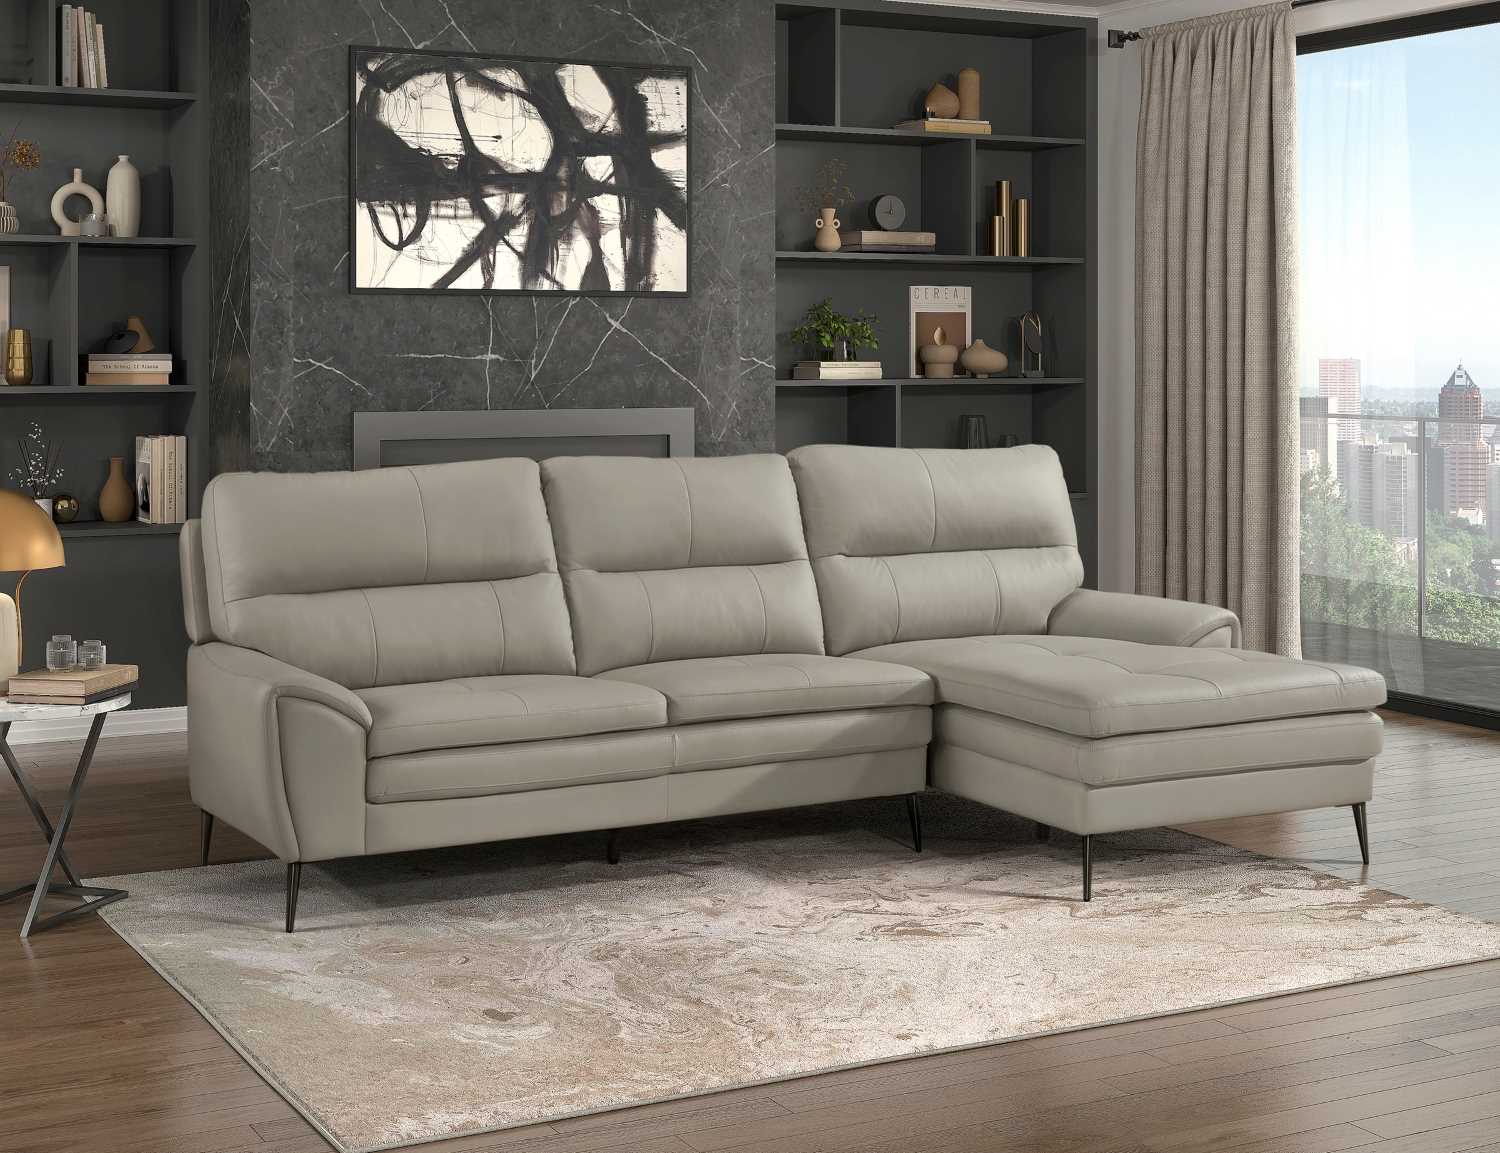 Essex  Top-Grain Cow Leather Sectional Sofa With Right Side Chaise 8577